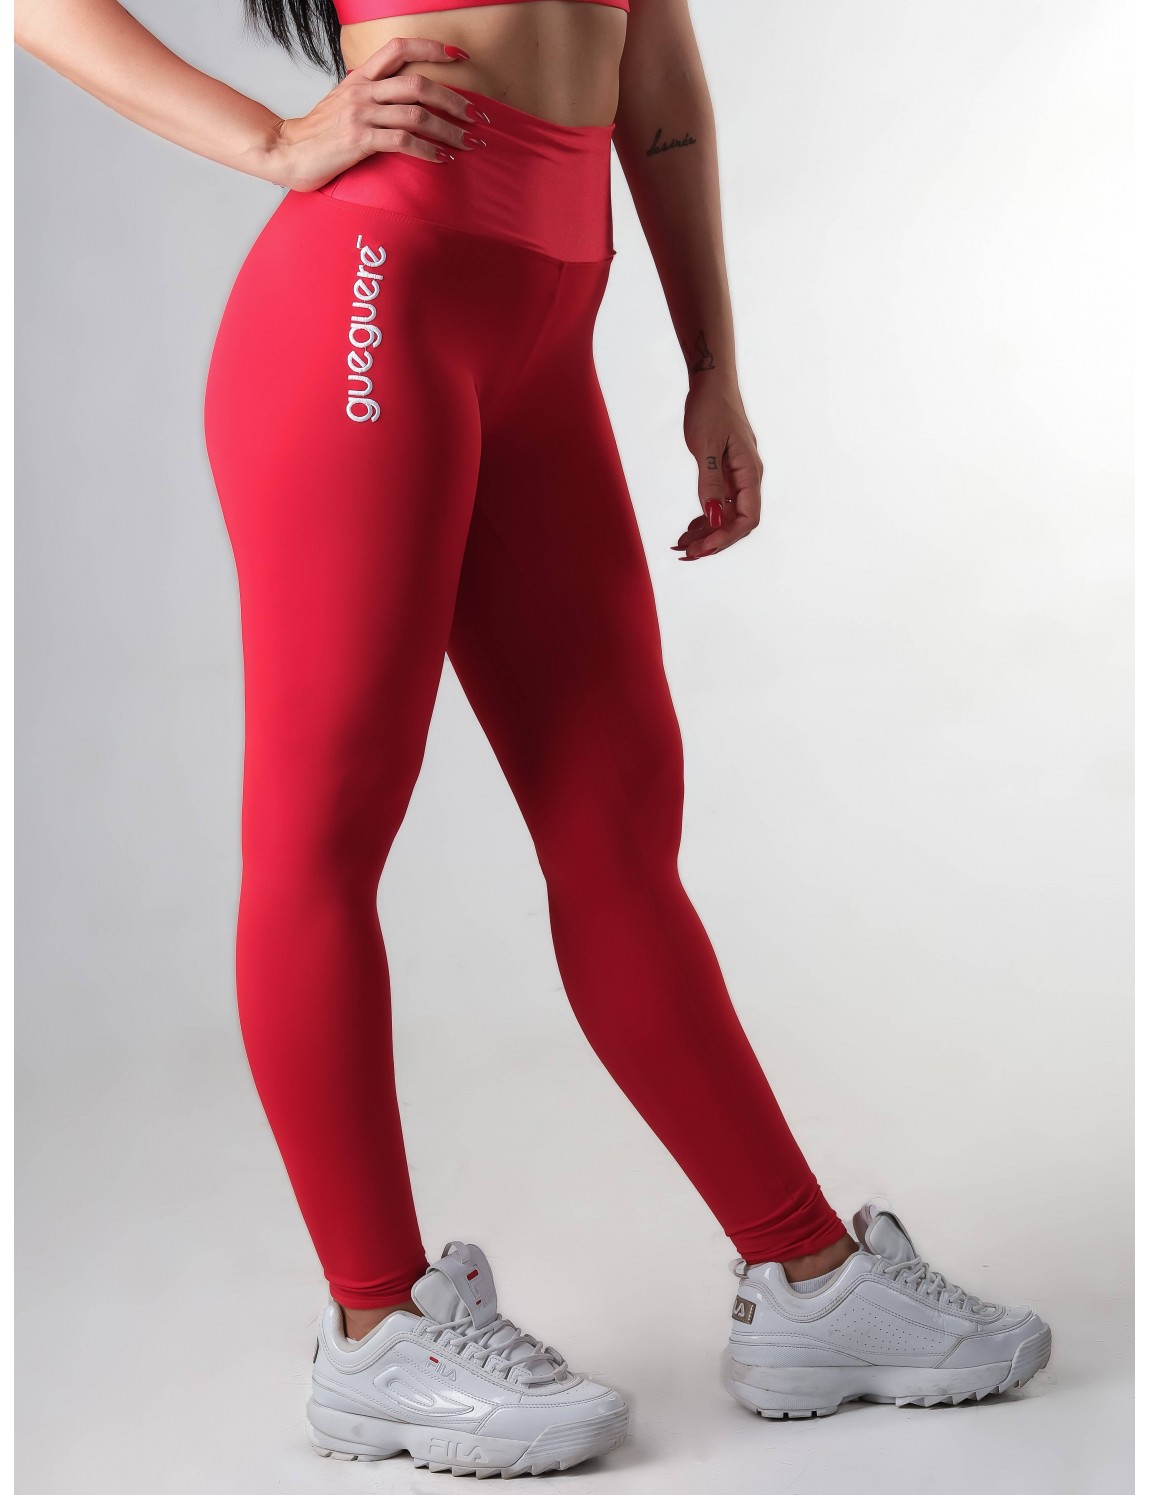 Legging licra red One push up design special for dance.